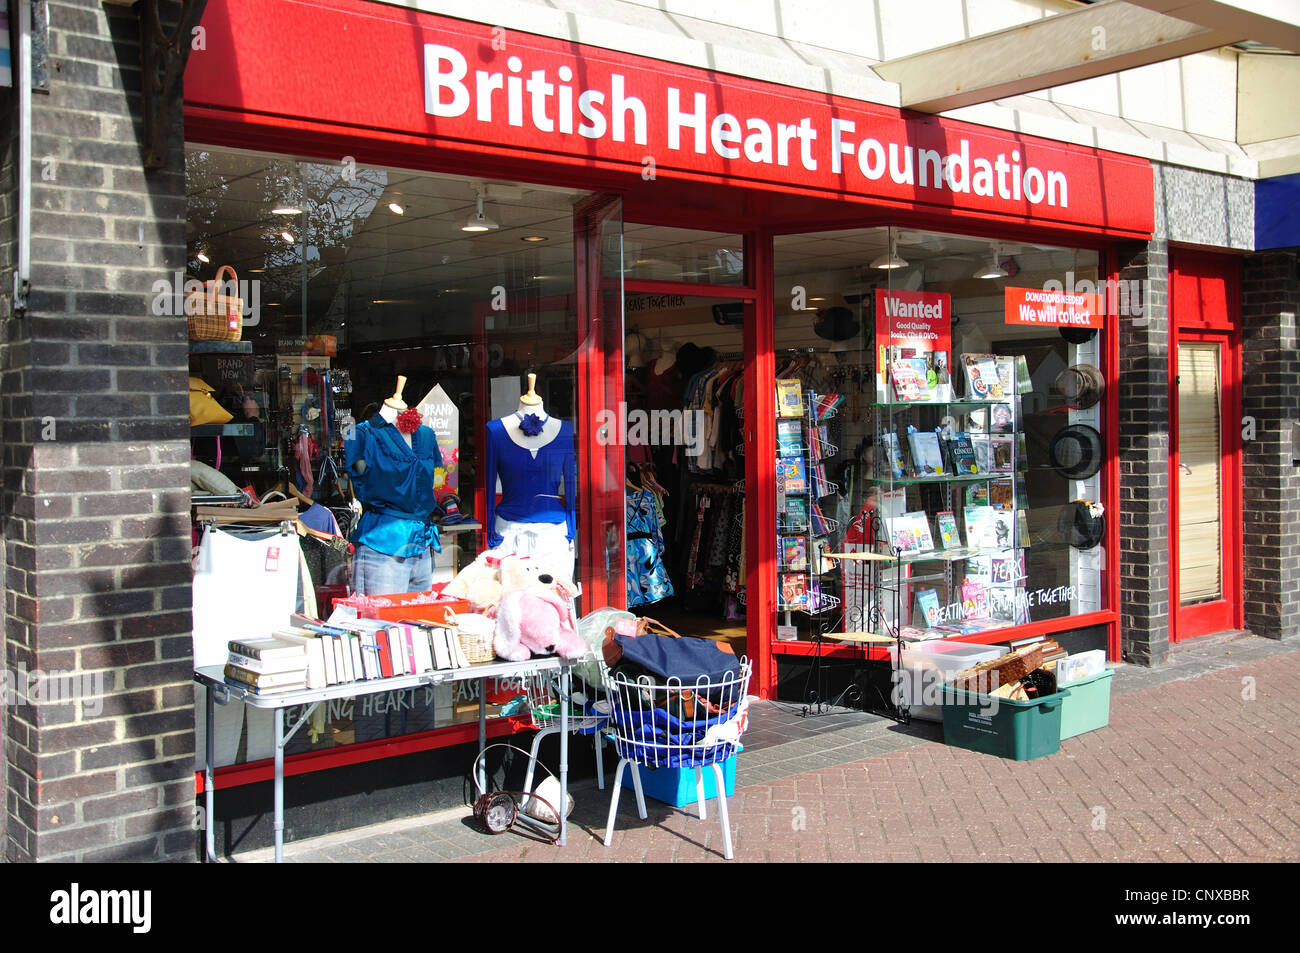 Exterior of British Heart Foundation charity shop, Vicarage Field, Hailsham, East Sussex, England, United Kingdom Stock Photo